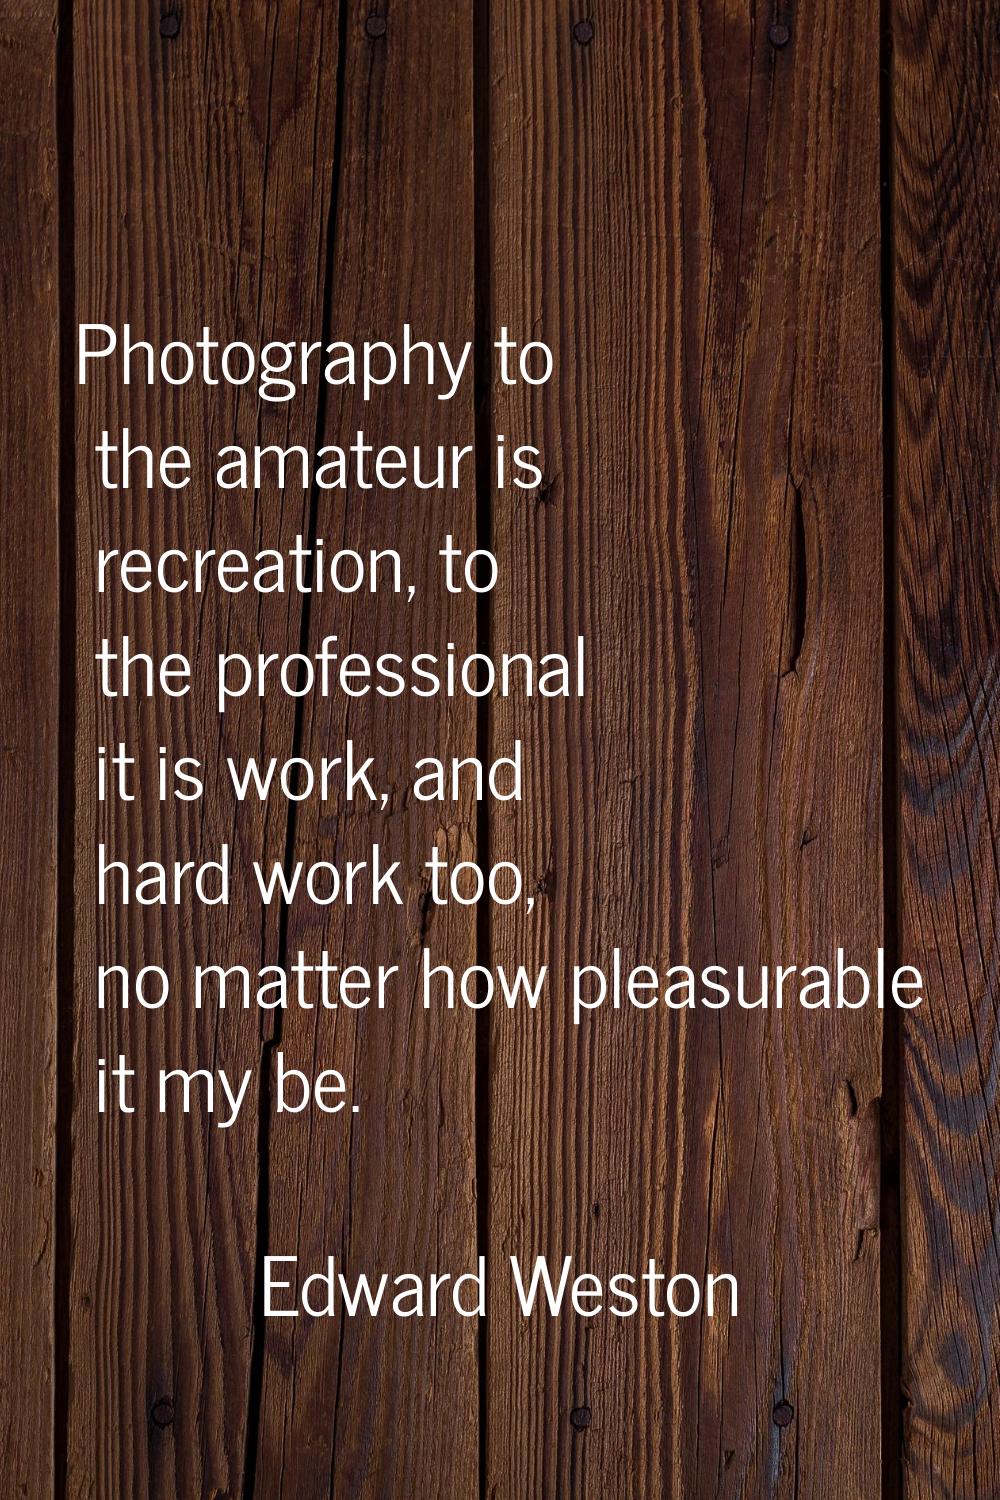 Photography to the amateur is recreation, to the professional it is work, and hard work too, no mat